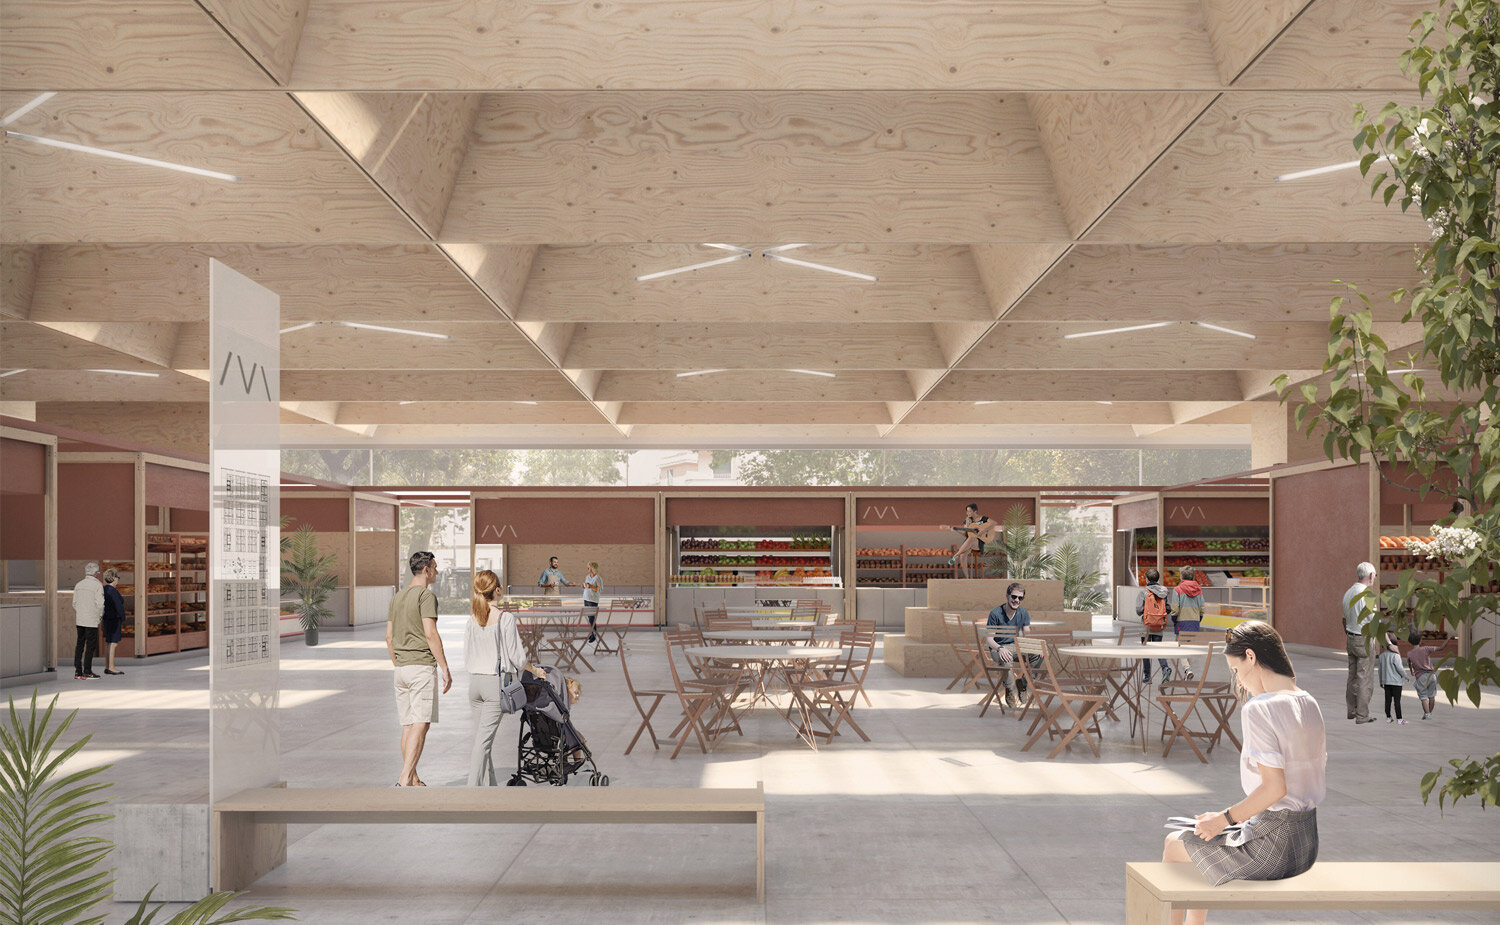  Third prize in the competition for the new San Giovanni di Dio market in Rome 